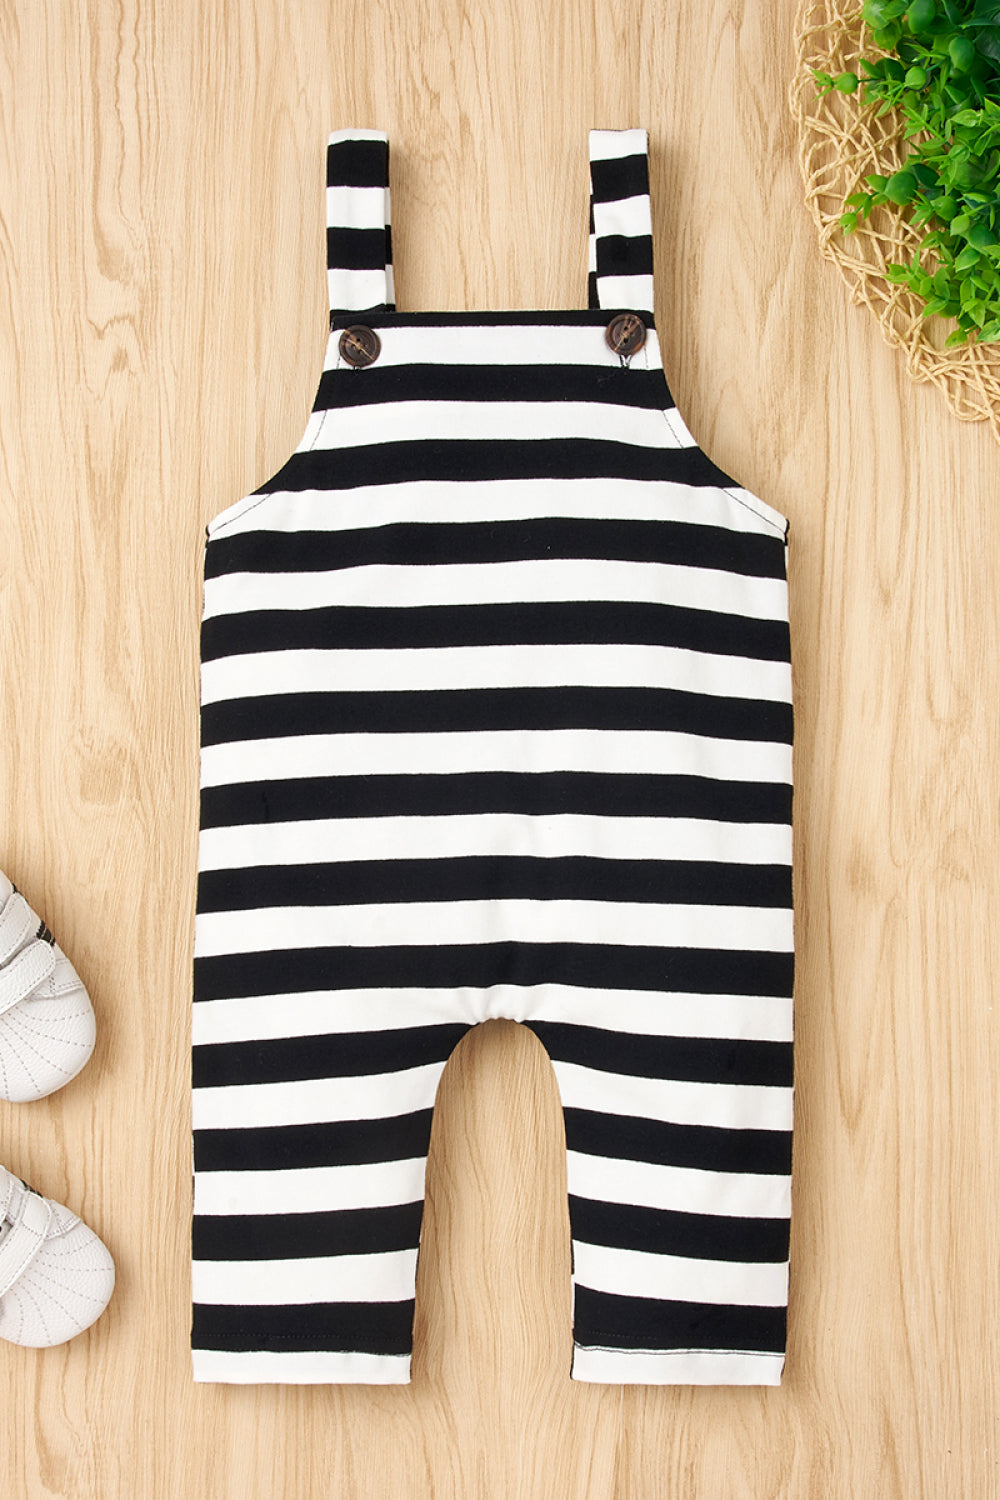 Baby Girl GOOD VIBES Bodysuit and Striped Overalls Set